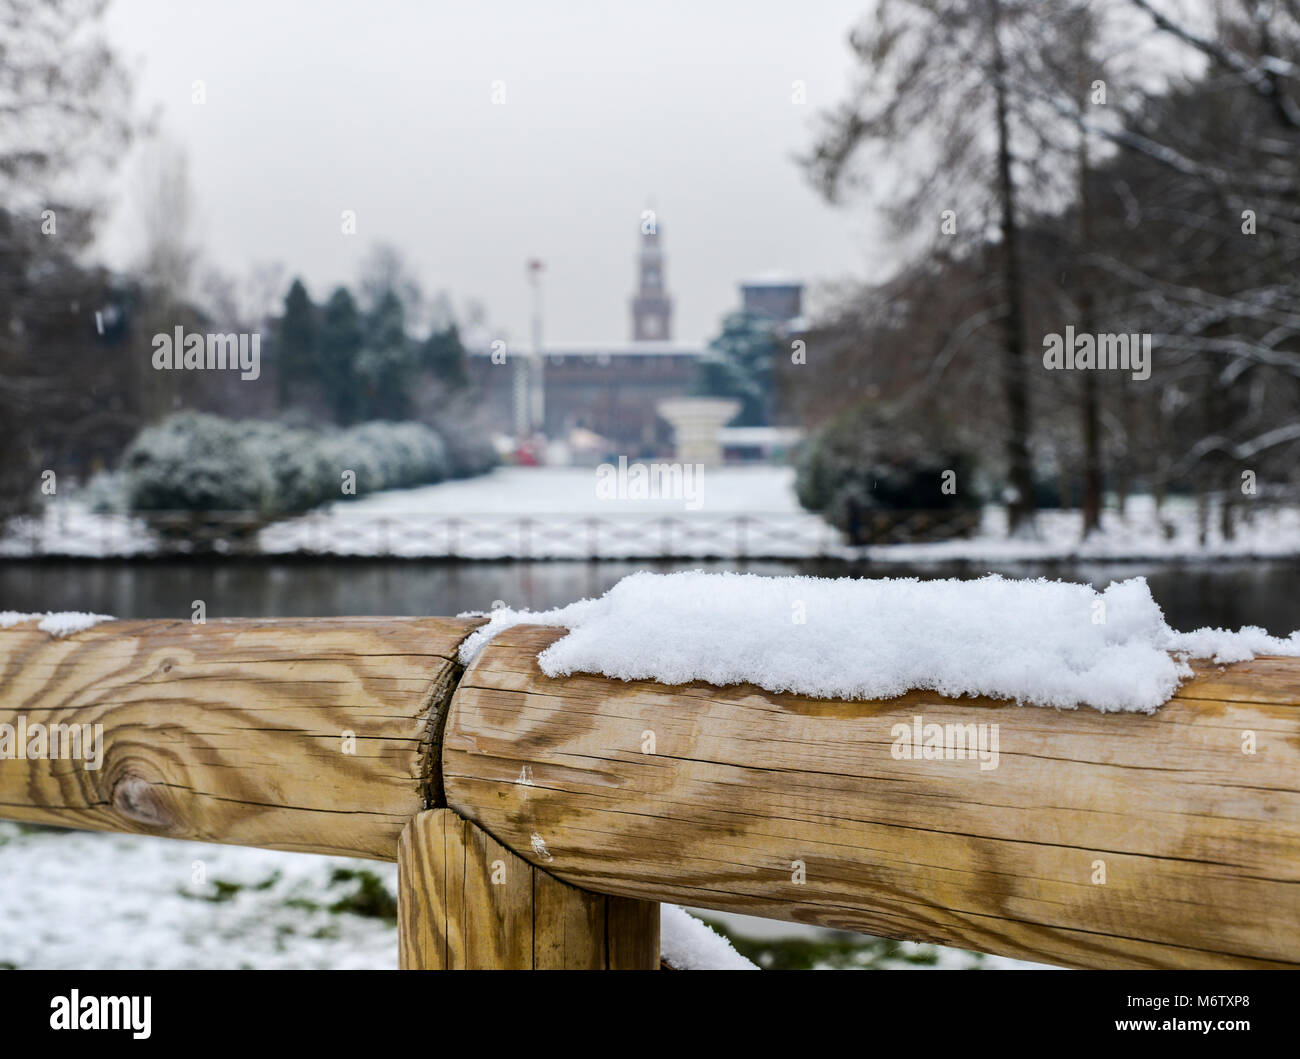 Selective focus of snow on wooden barrier with Sforza Castle, Italian: Castello Sforzesco, in Milan, northern Italy in background. Stock Photo